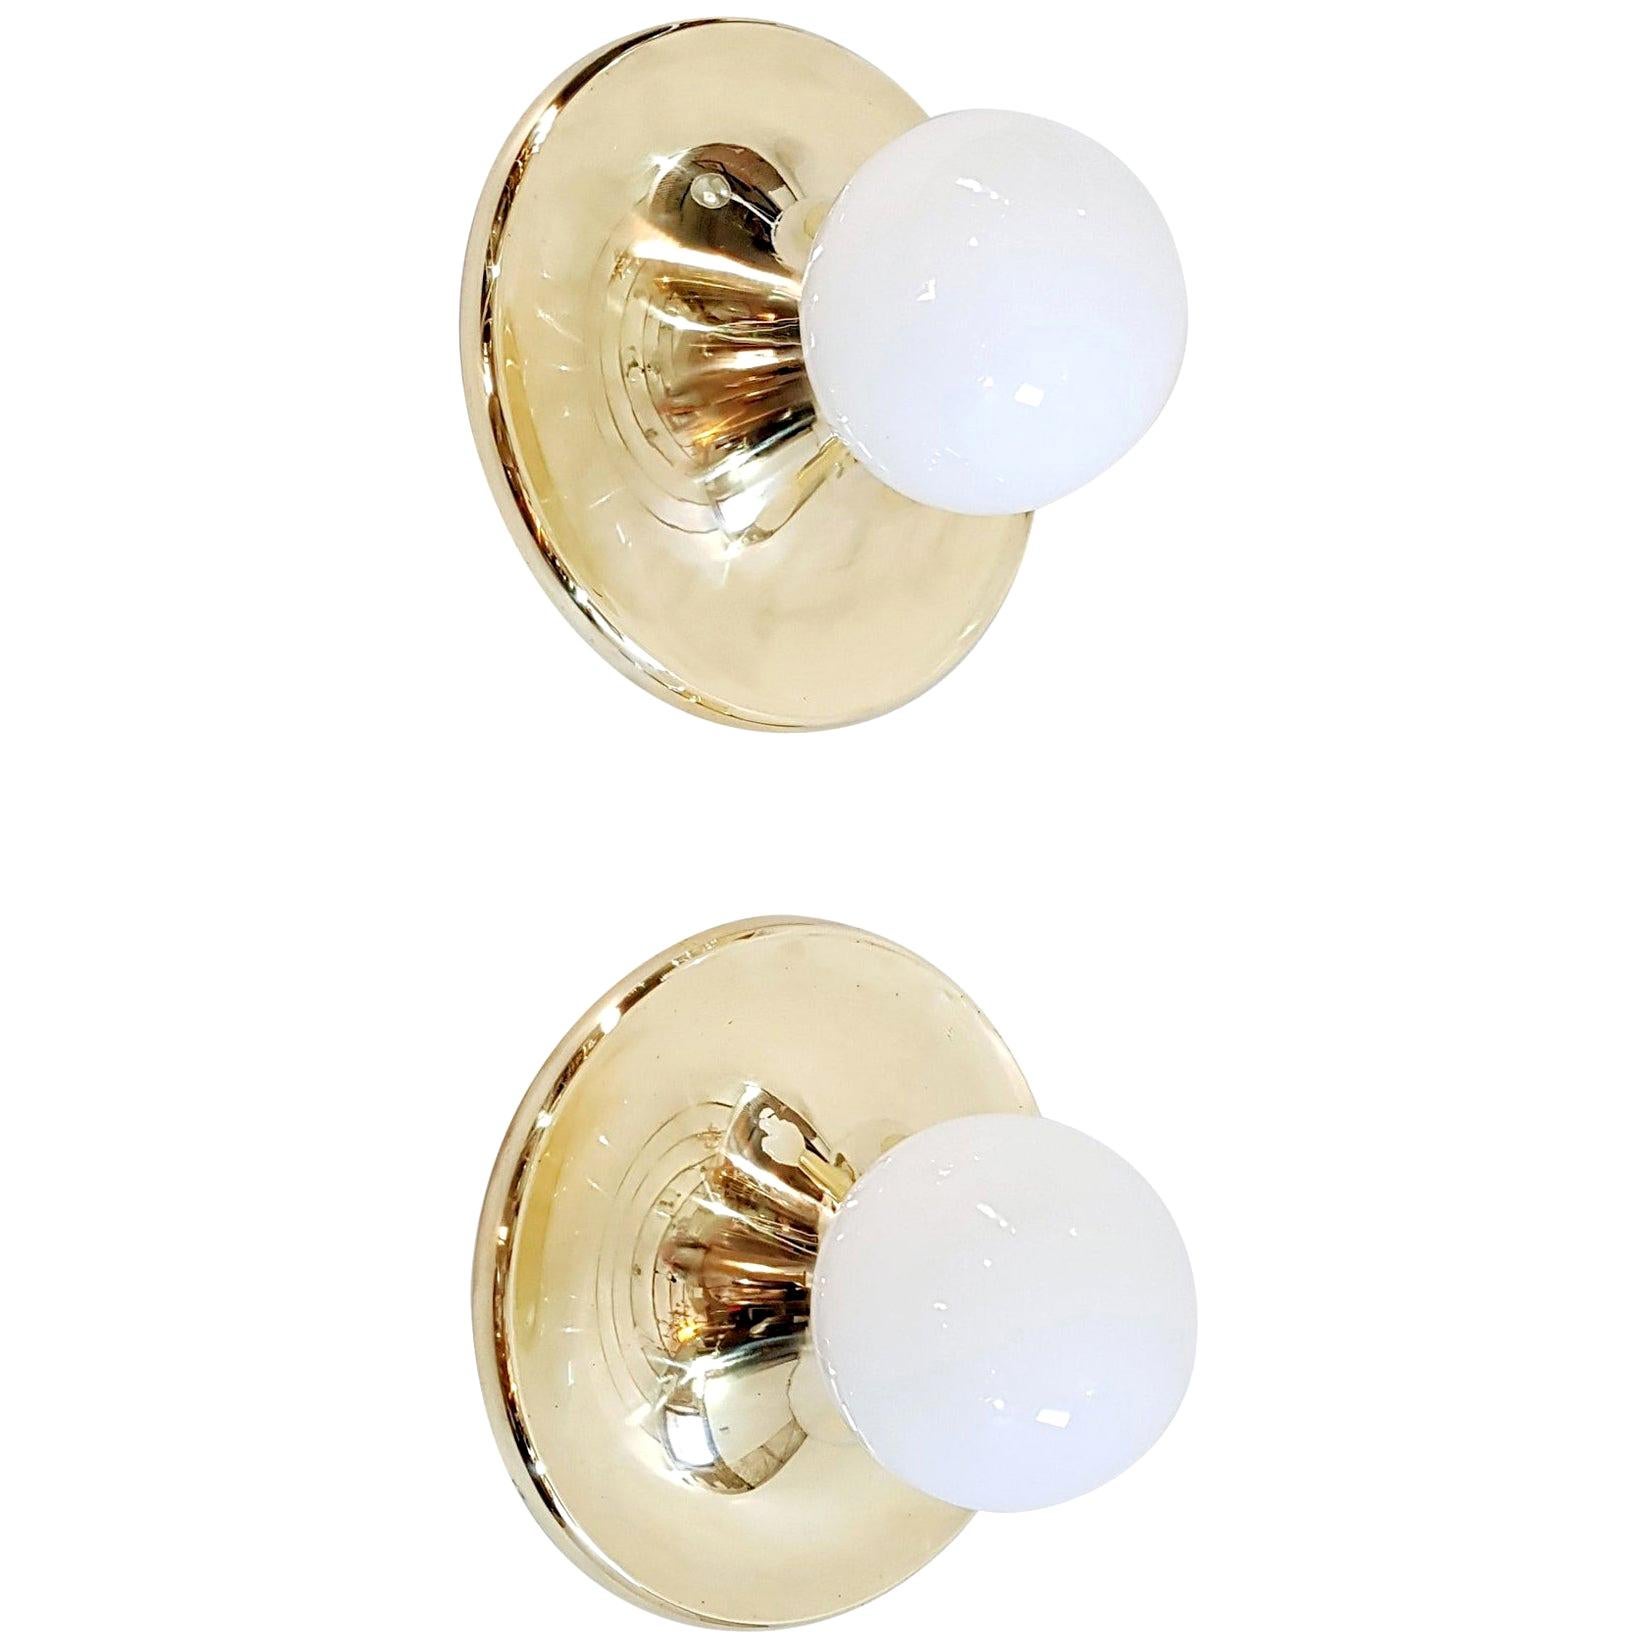 Pair of Wall Sconces by Castiglioni for Flos, Italy, 1965